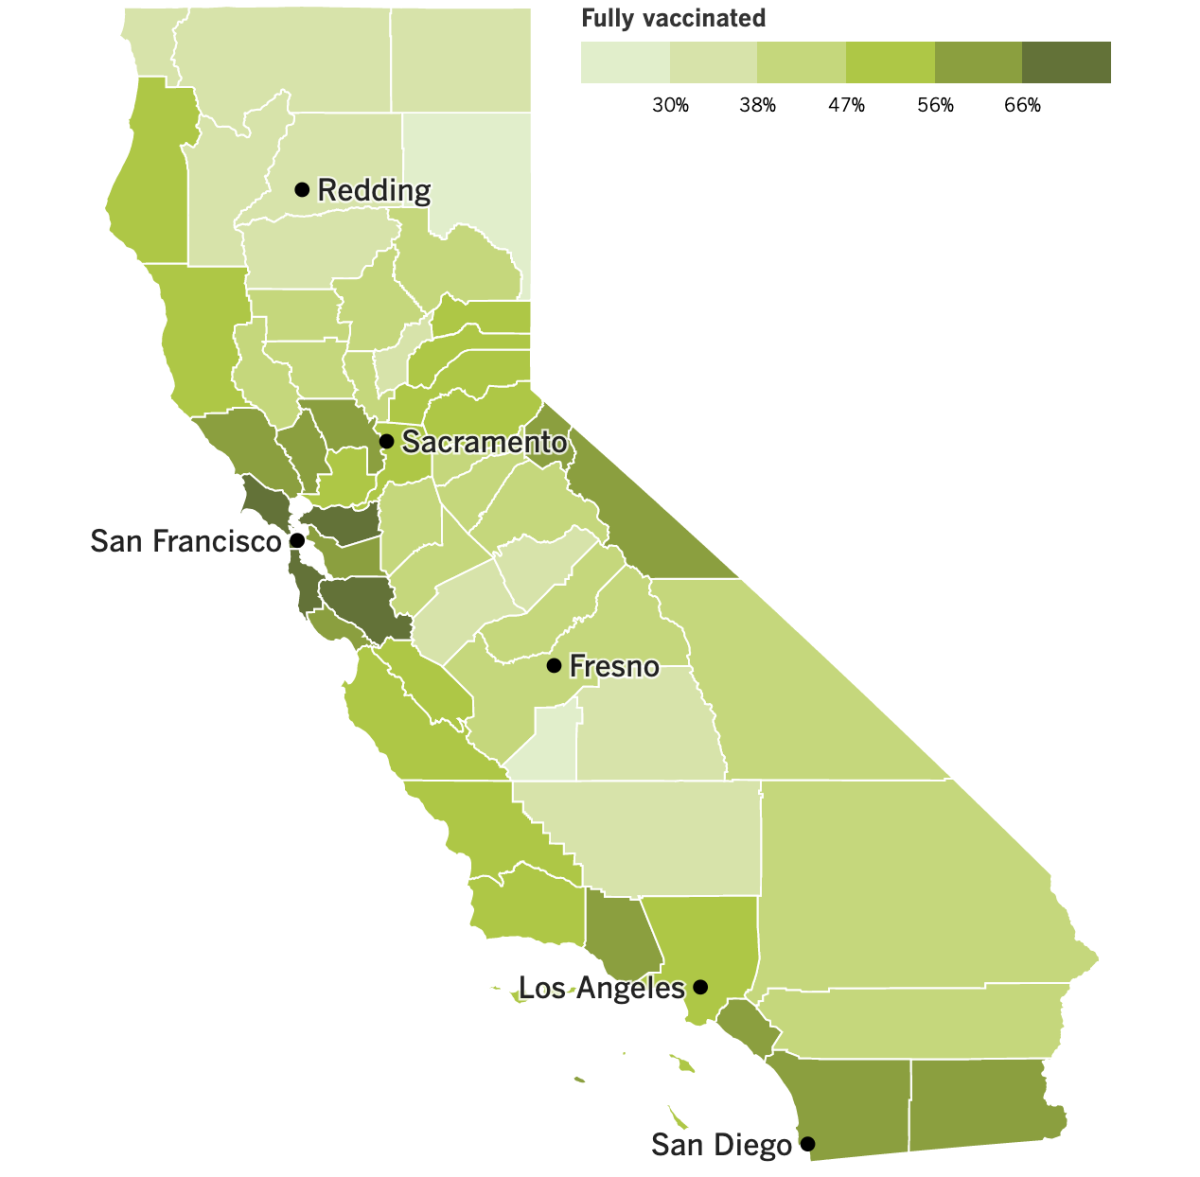 California county map of fully vaccinated rates as of Aug. 6.